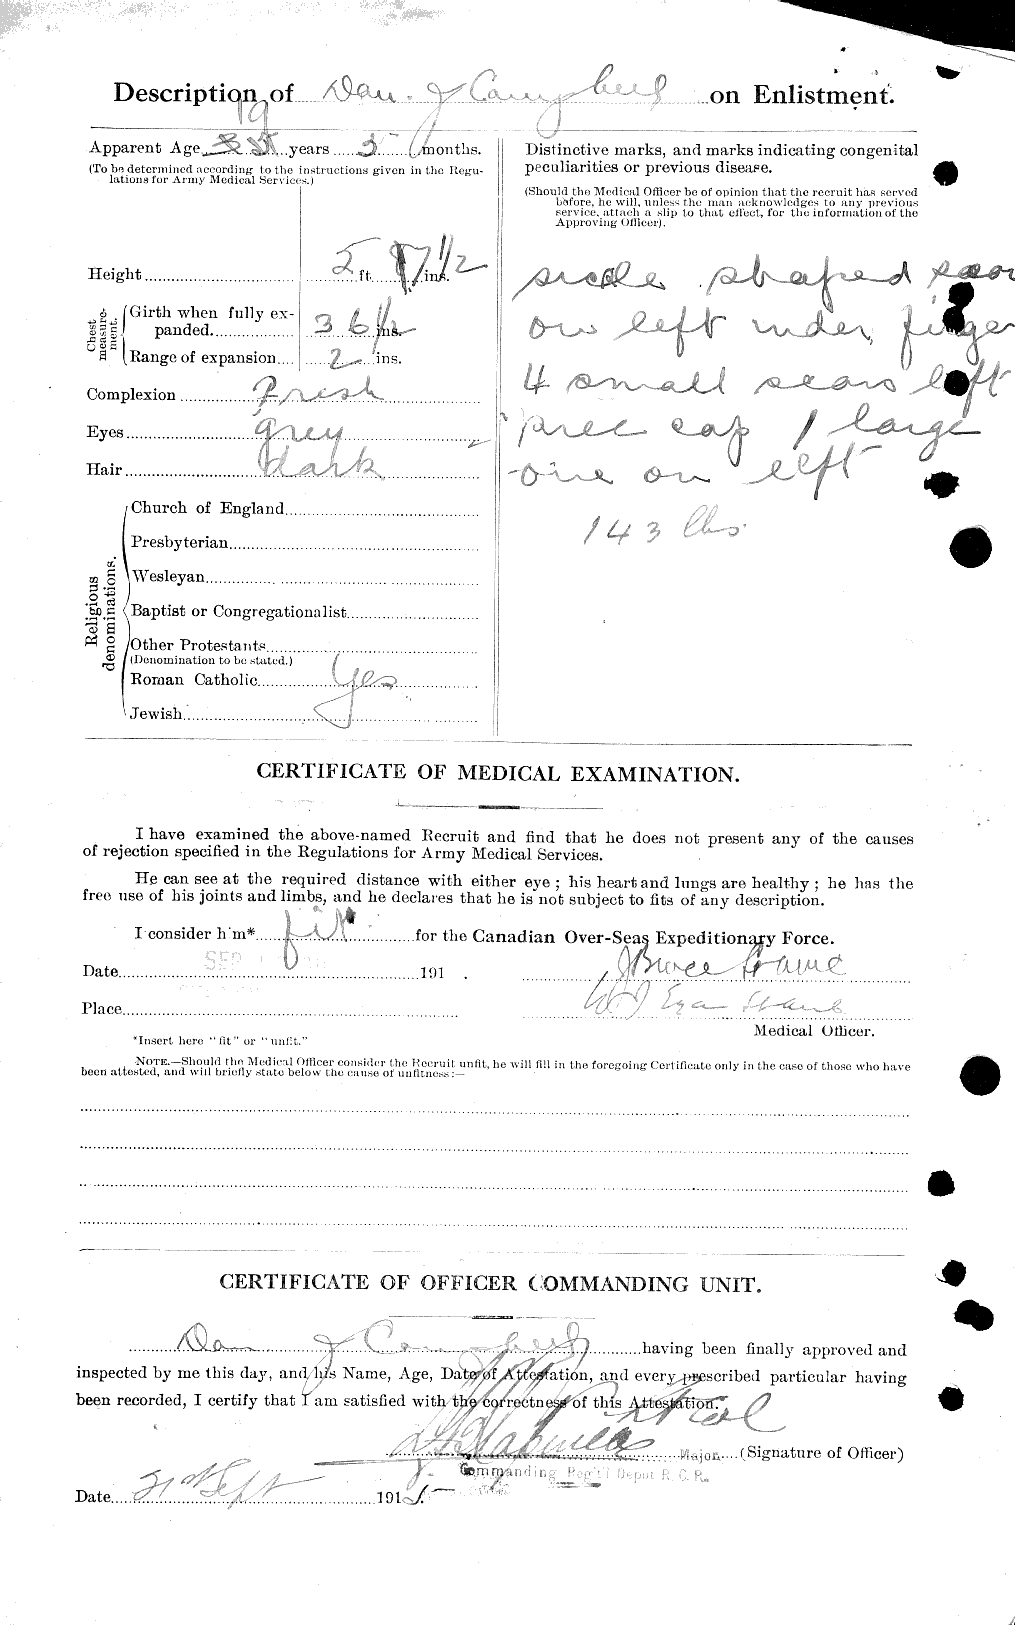 Personnel Records of the First World War - CEF 008174b